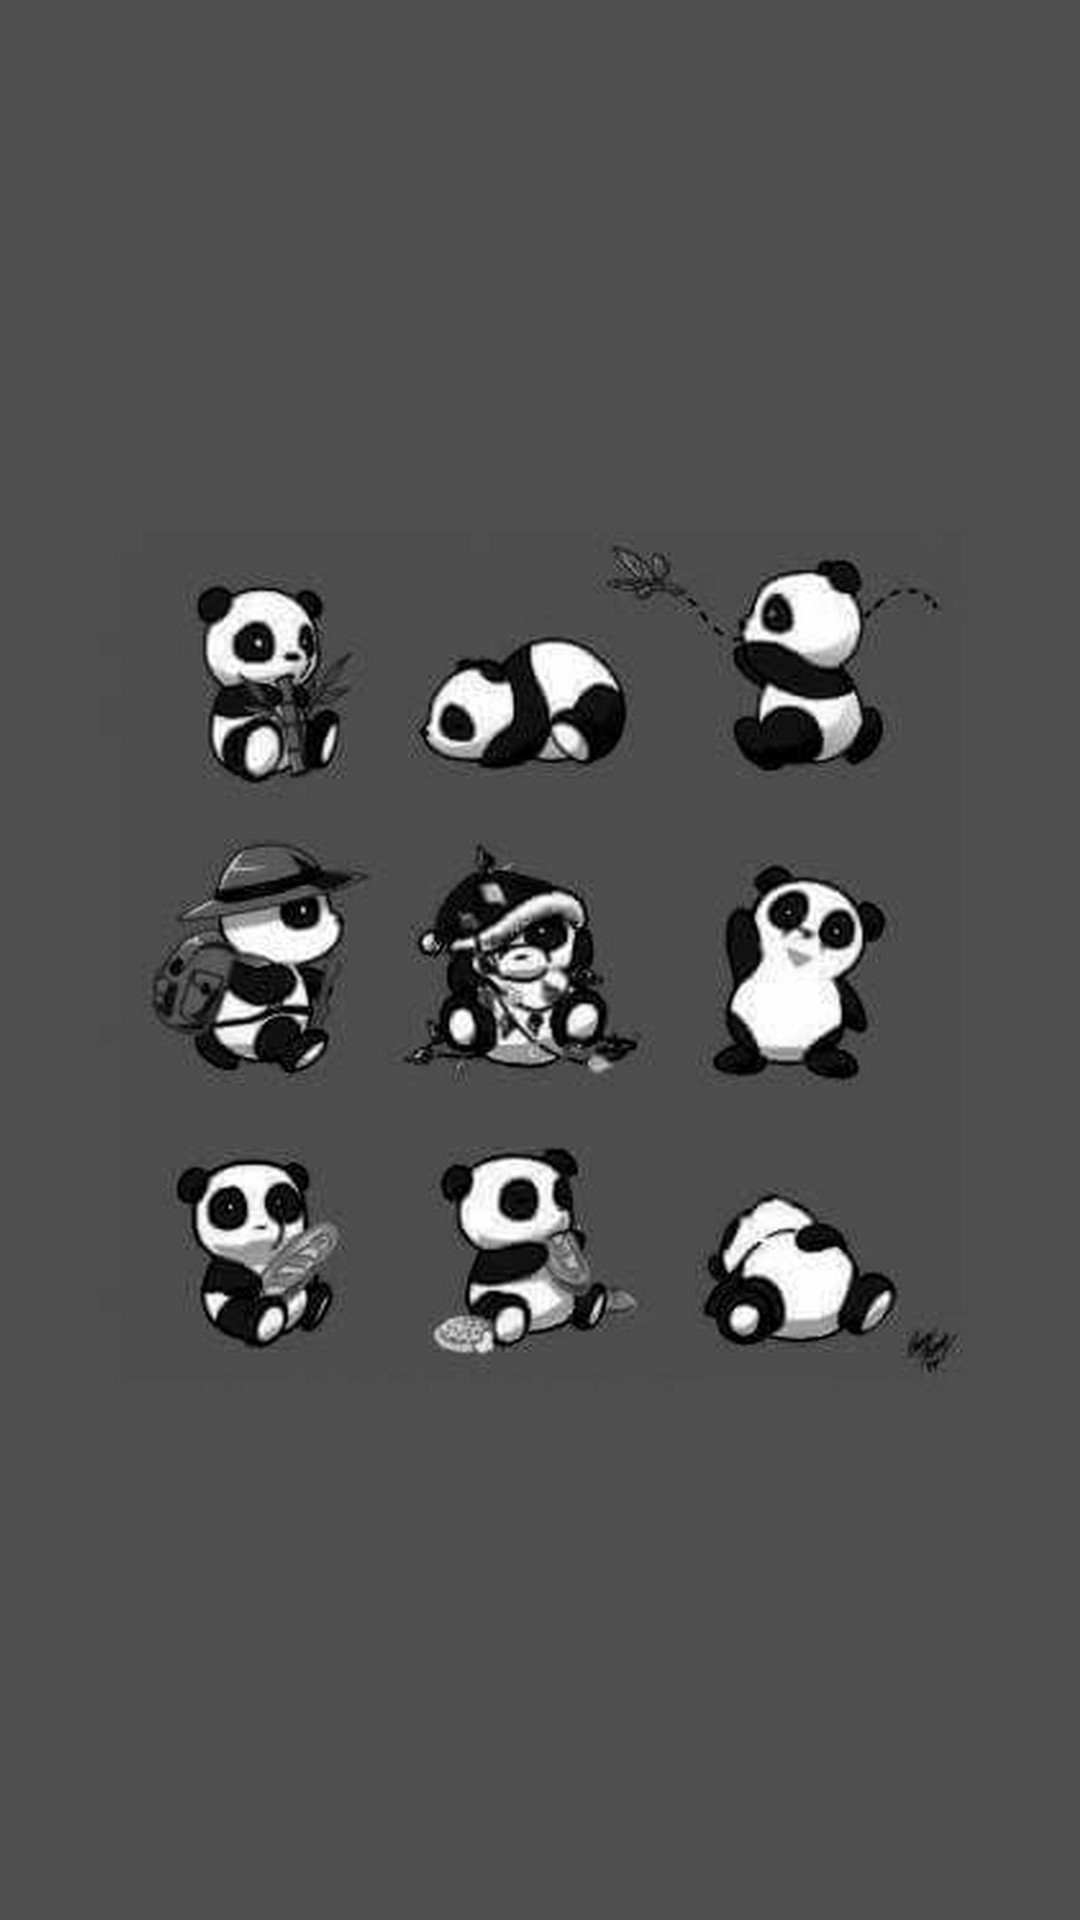 Baby Panda HD Wallpapers For Mobile Resolution 1080x1920